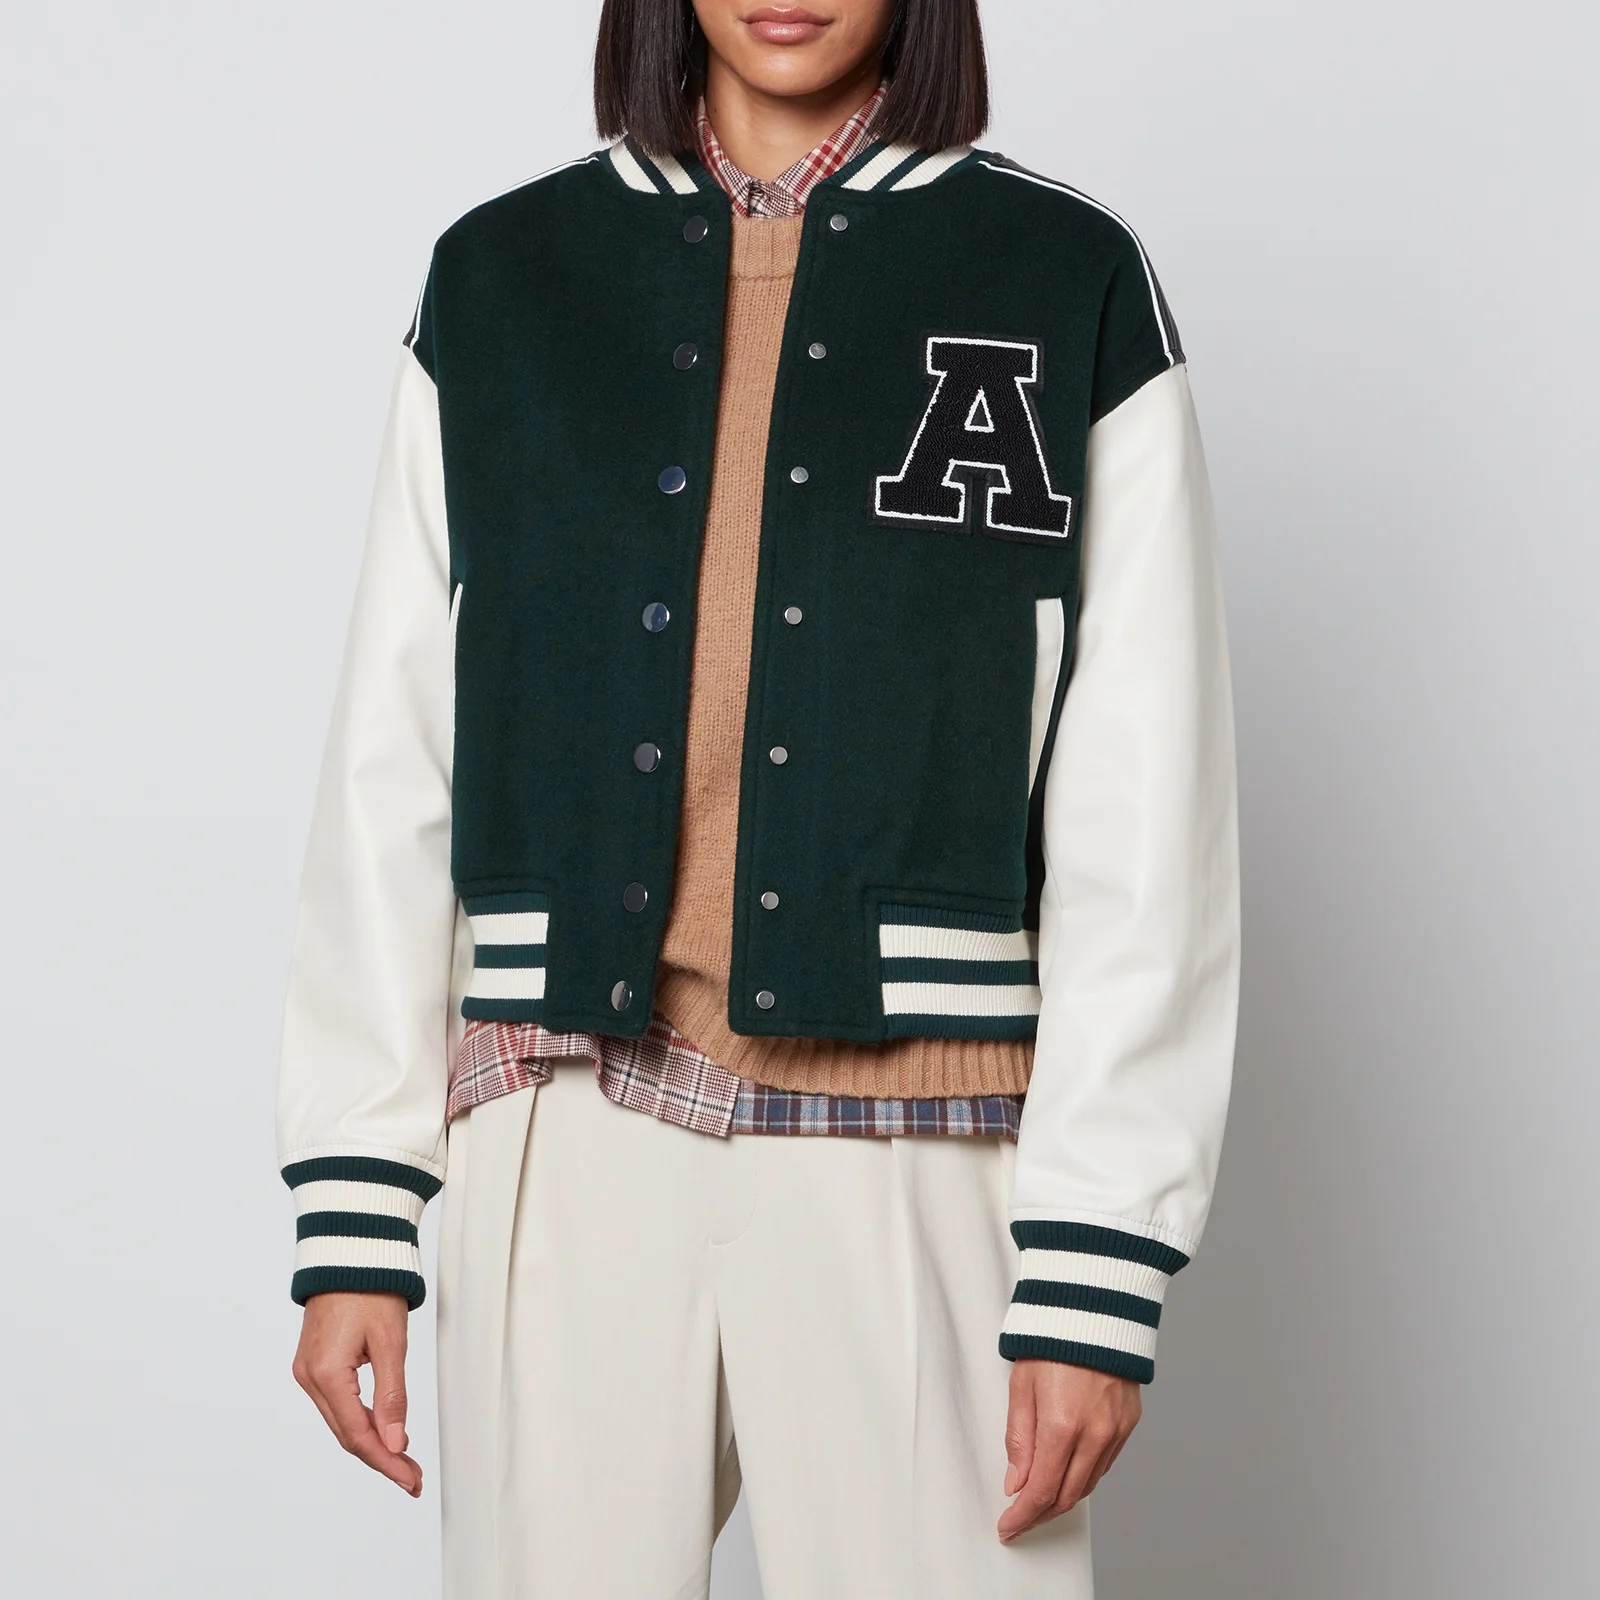 Axel Arigato Ivy Wool-Blend and Faux Leather Varsity Jacket Image 1